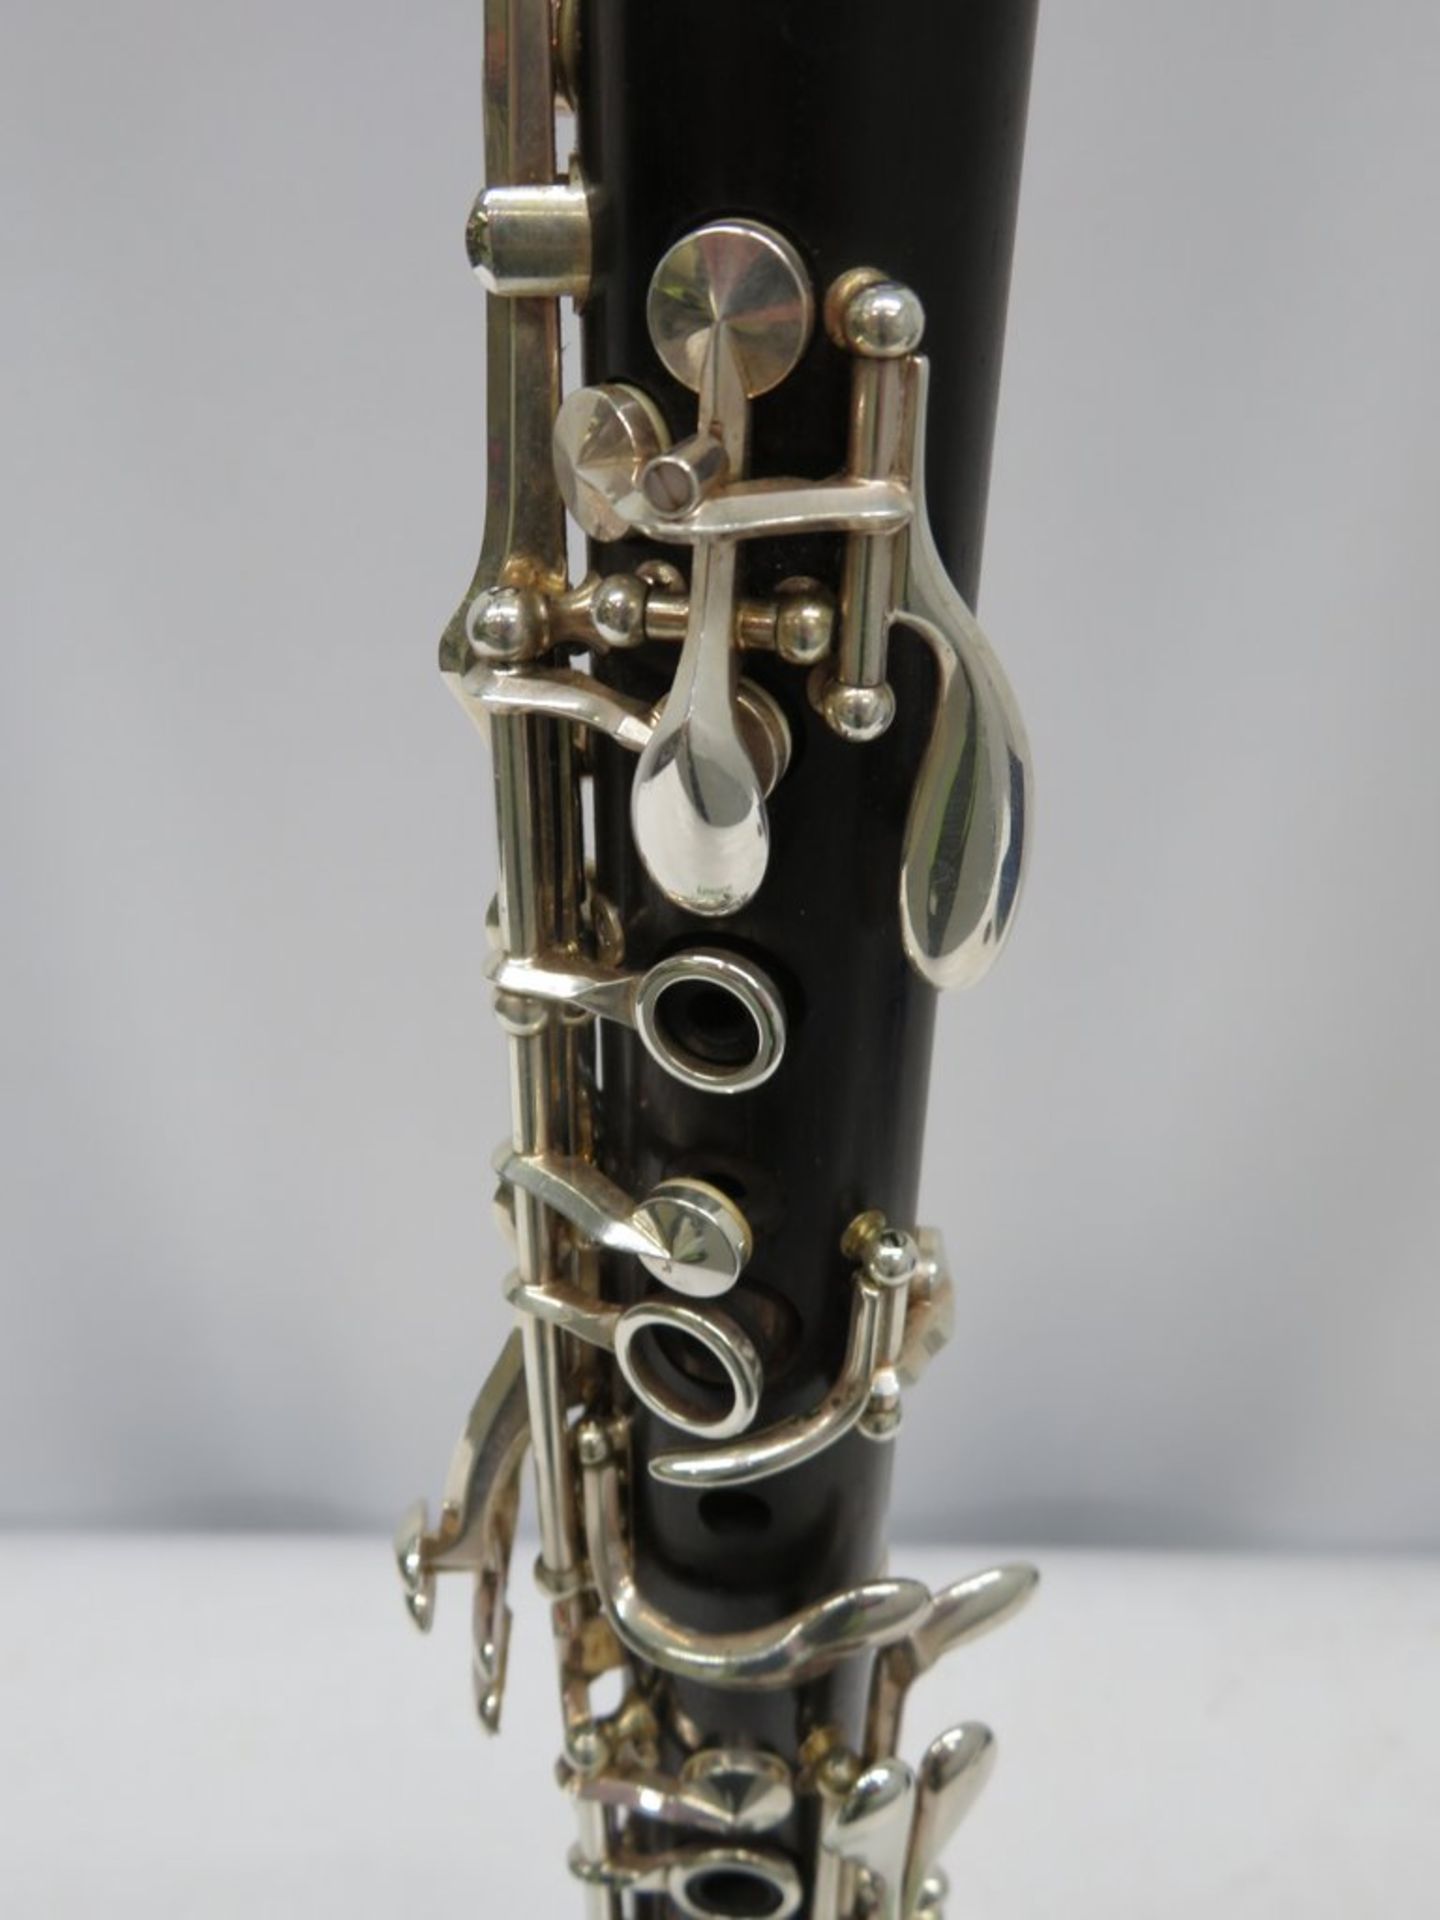 Buffet Crampon R13 Clarinet With Case. Serial Number: 386372. Full Length 63cm. Please No - Image 5 of 14